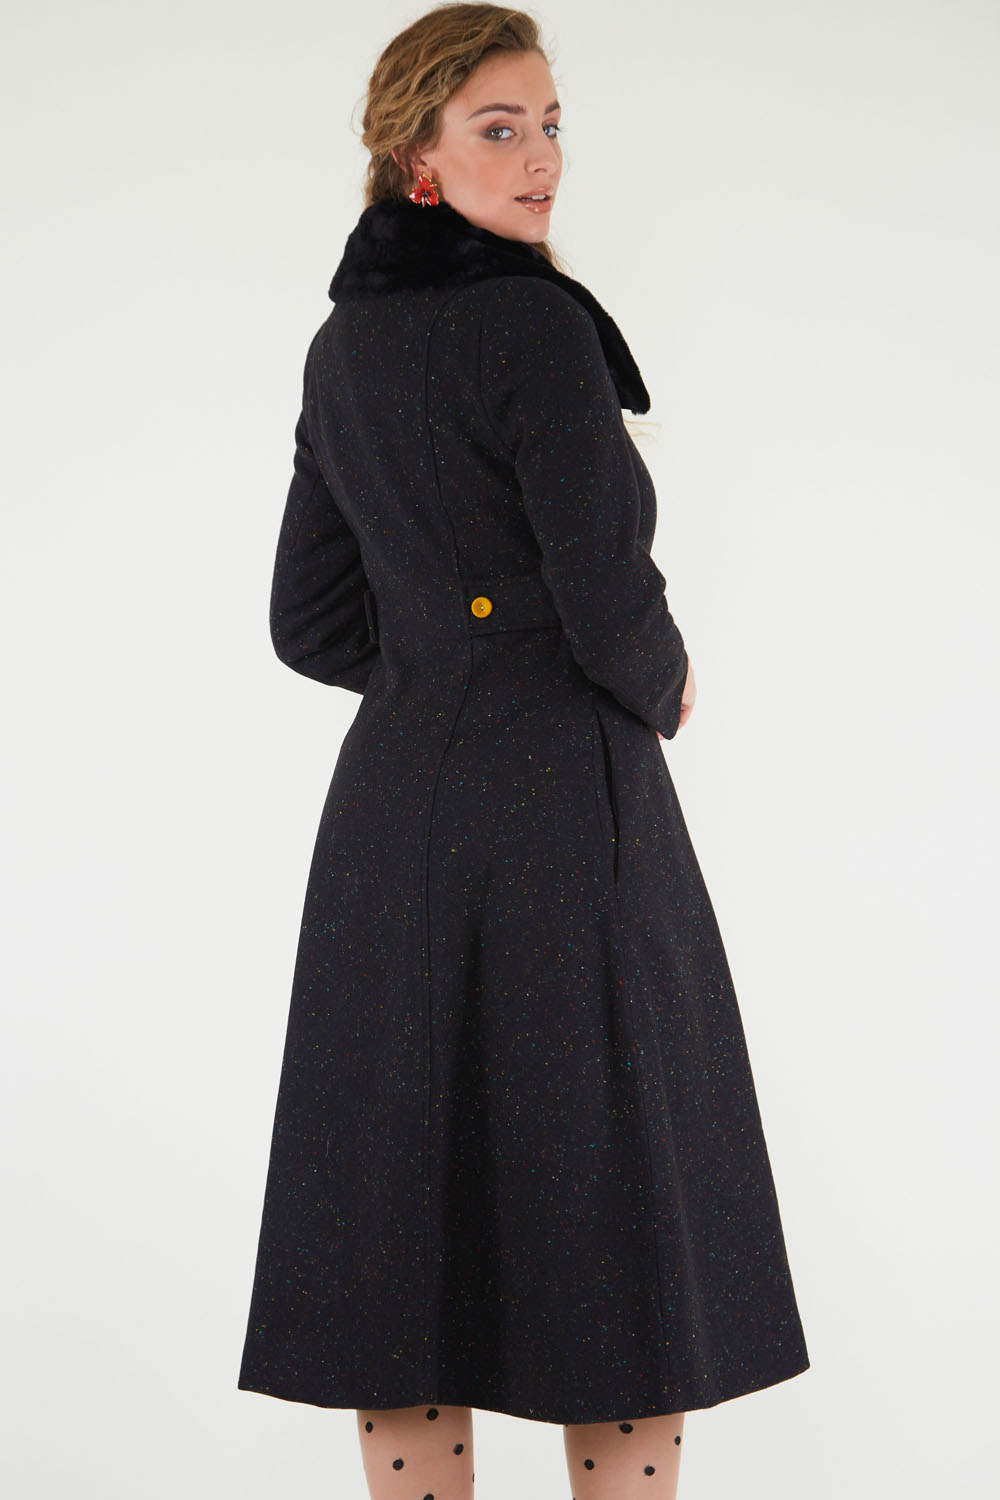 Molly Speckled Coat | Vintage Inspired Fashion & Accessories | 40s and ...